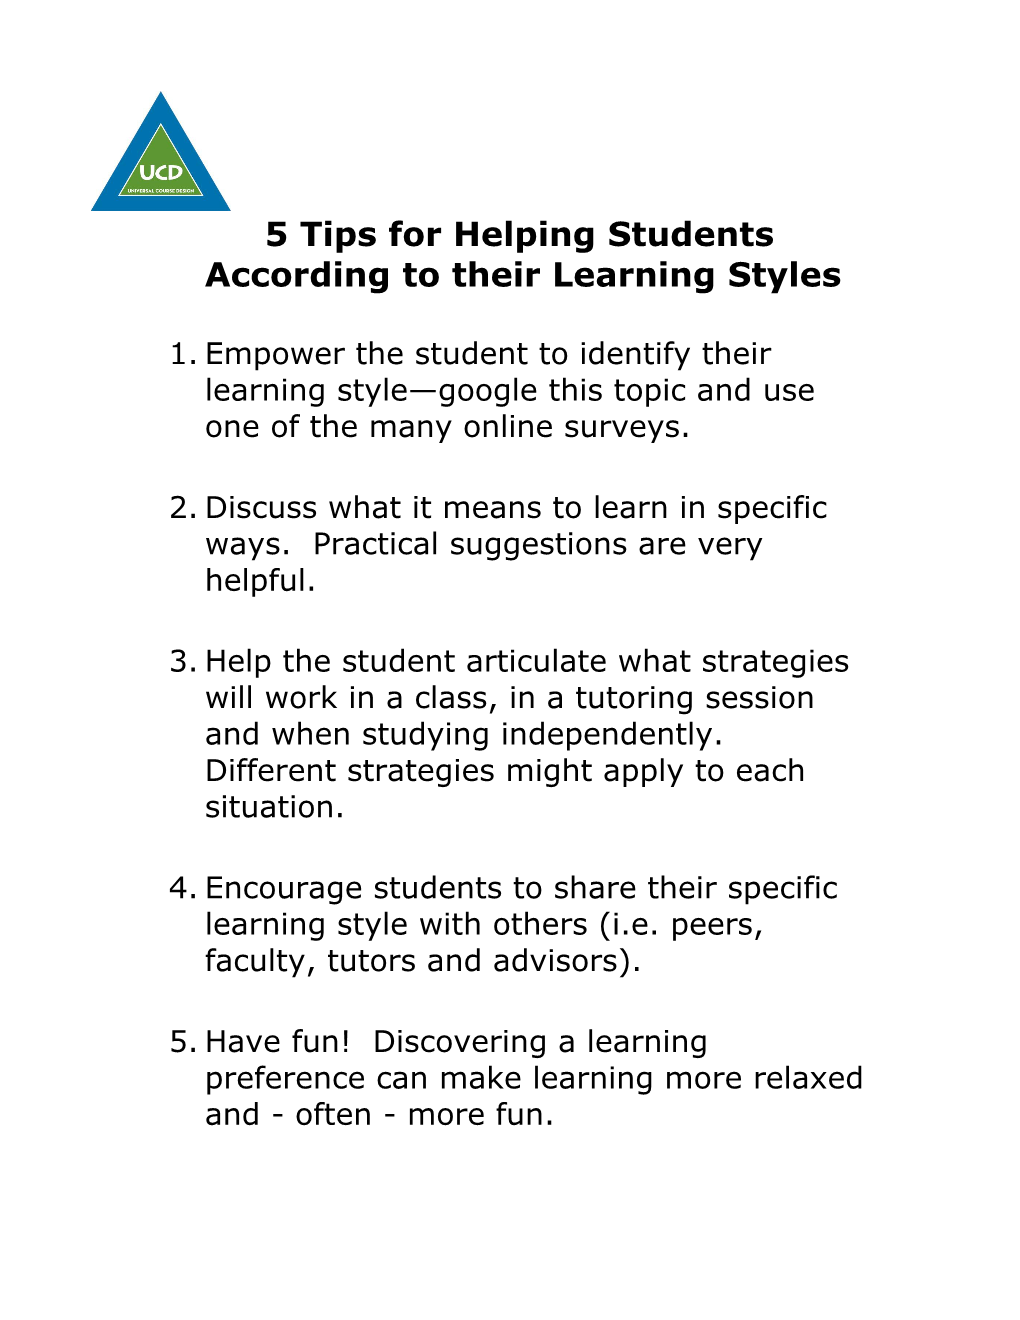 5 Tips for Helping Students According to Their Learning Styles